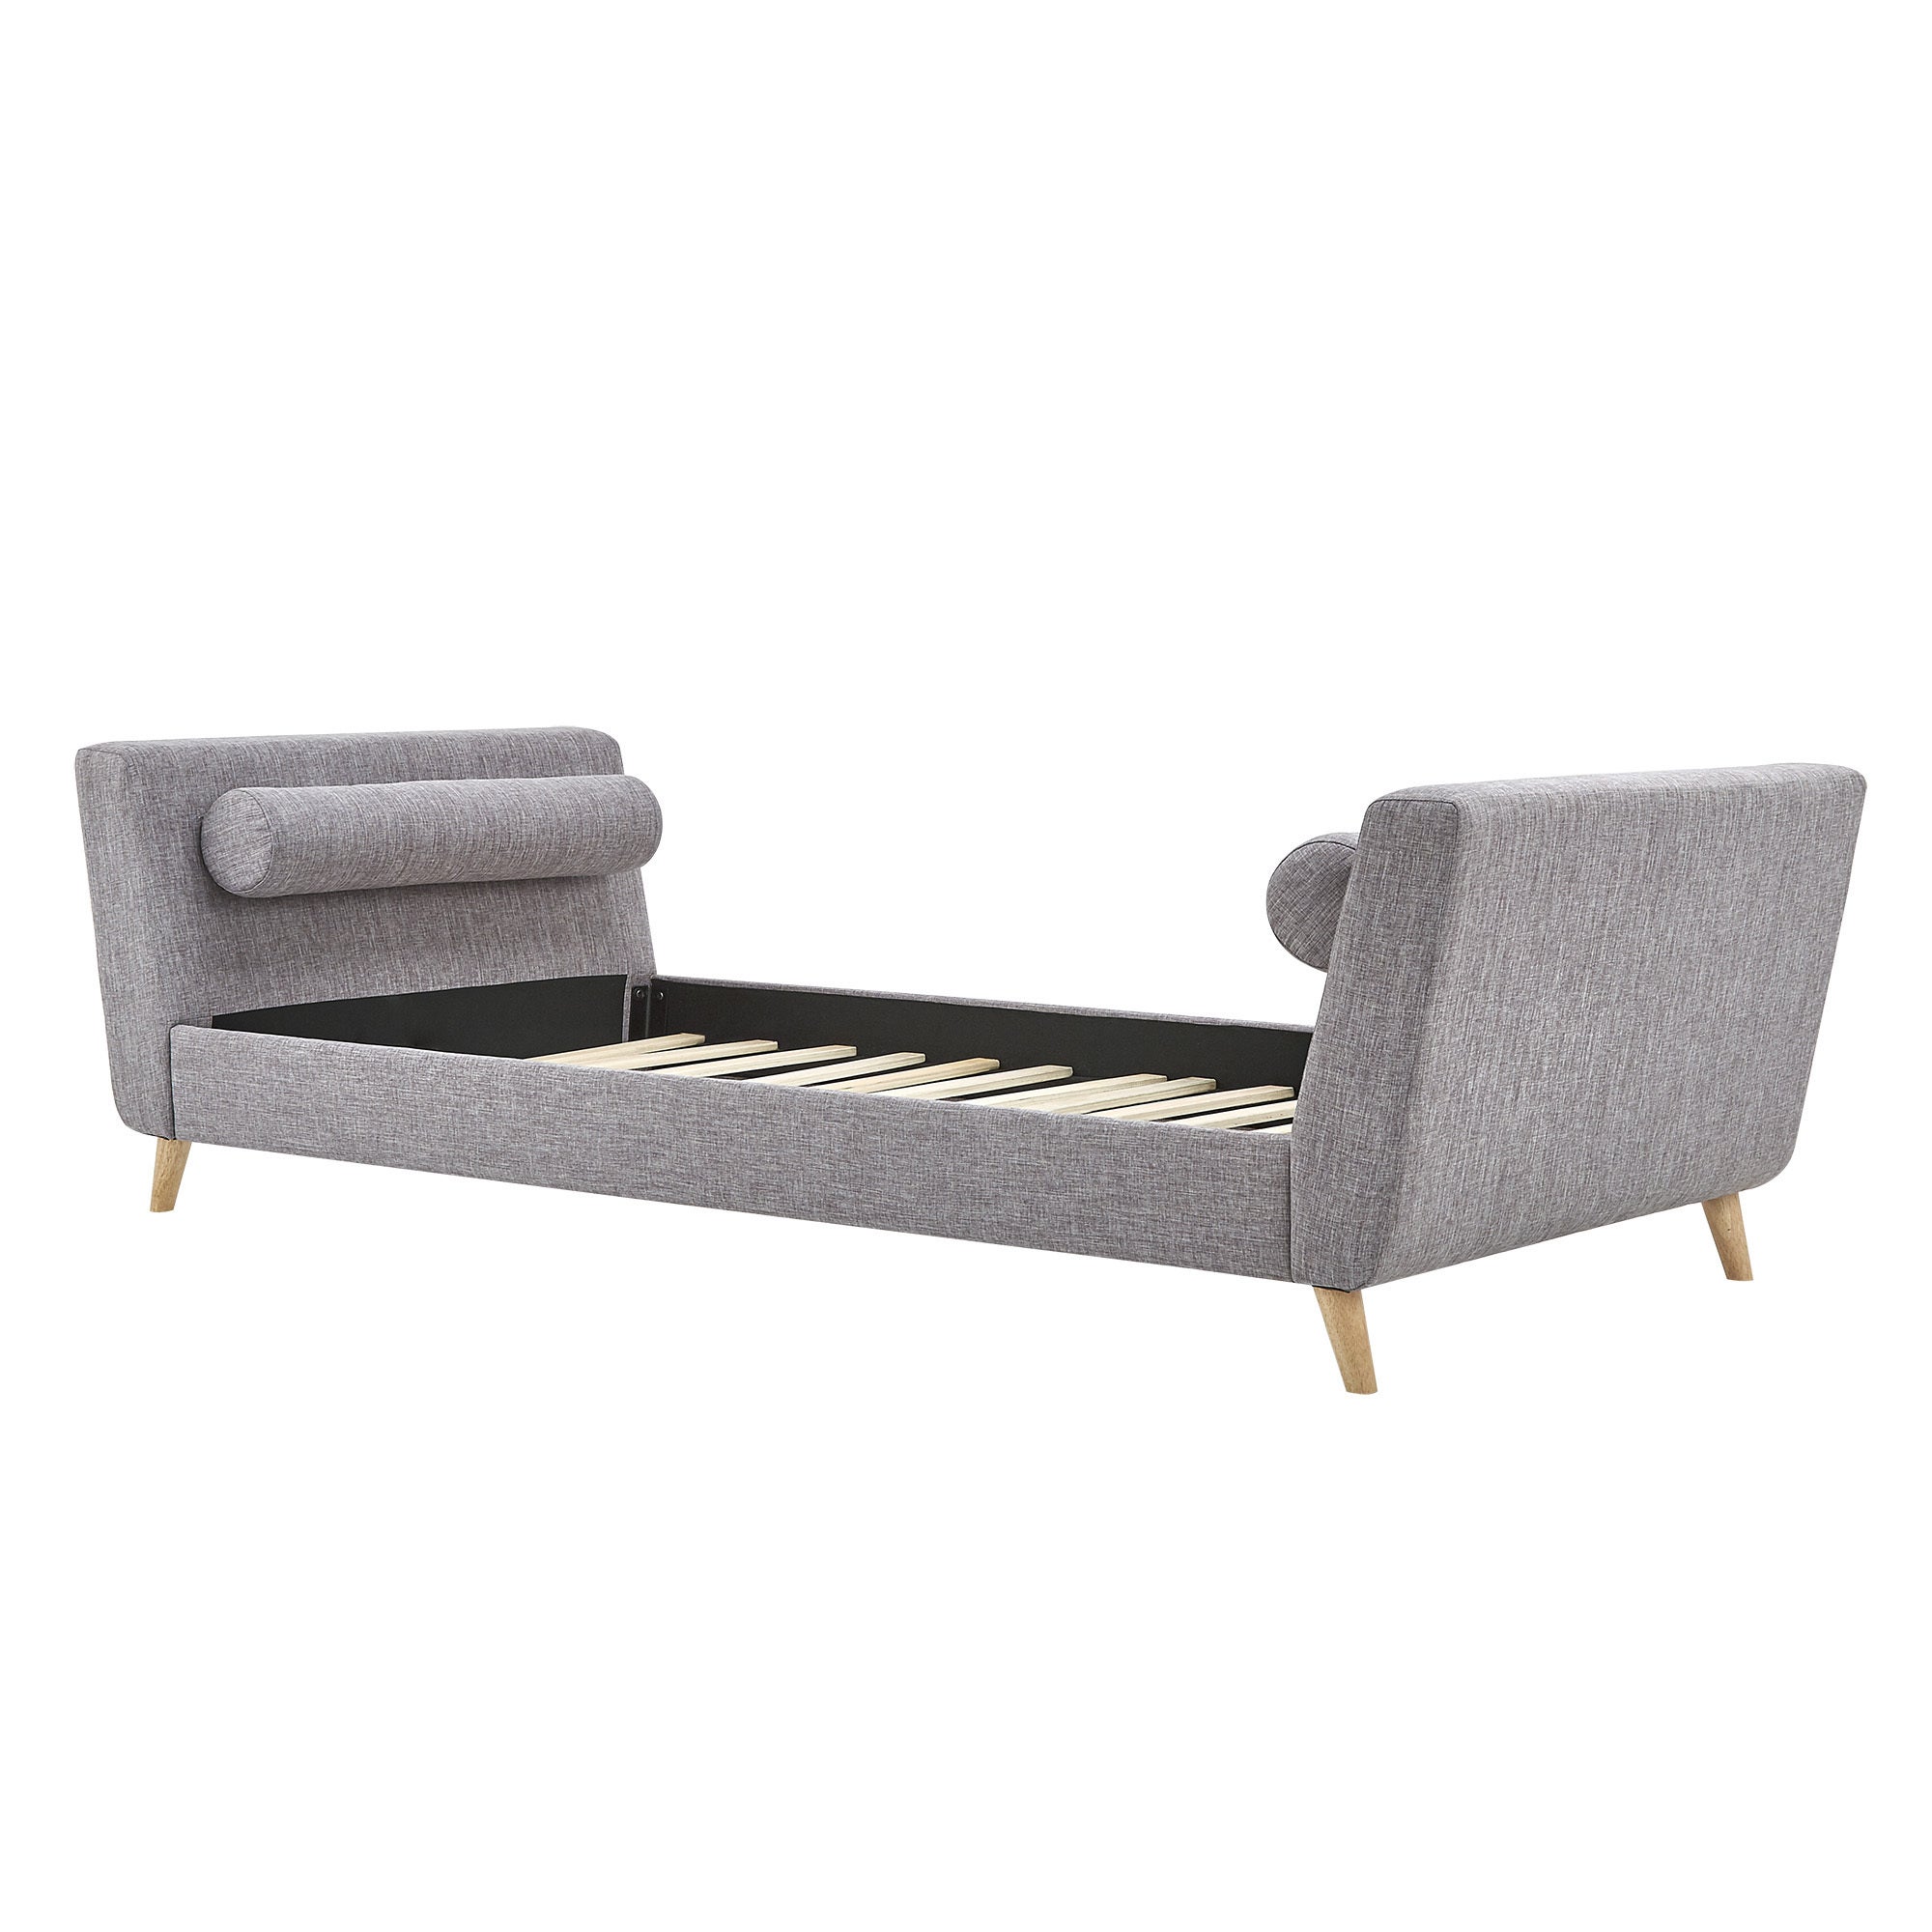 DingZhi  Upholstered Chesterfield Arm Lazy Boy Sofa 2019 10